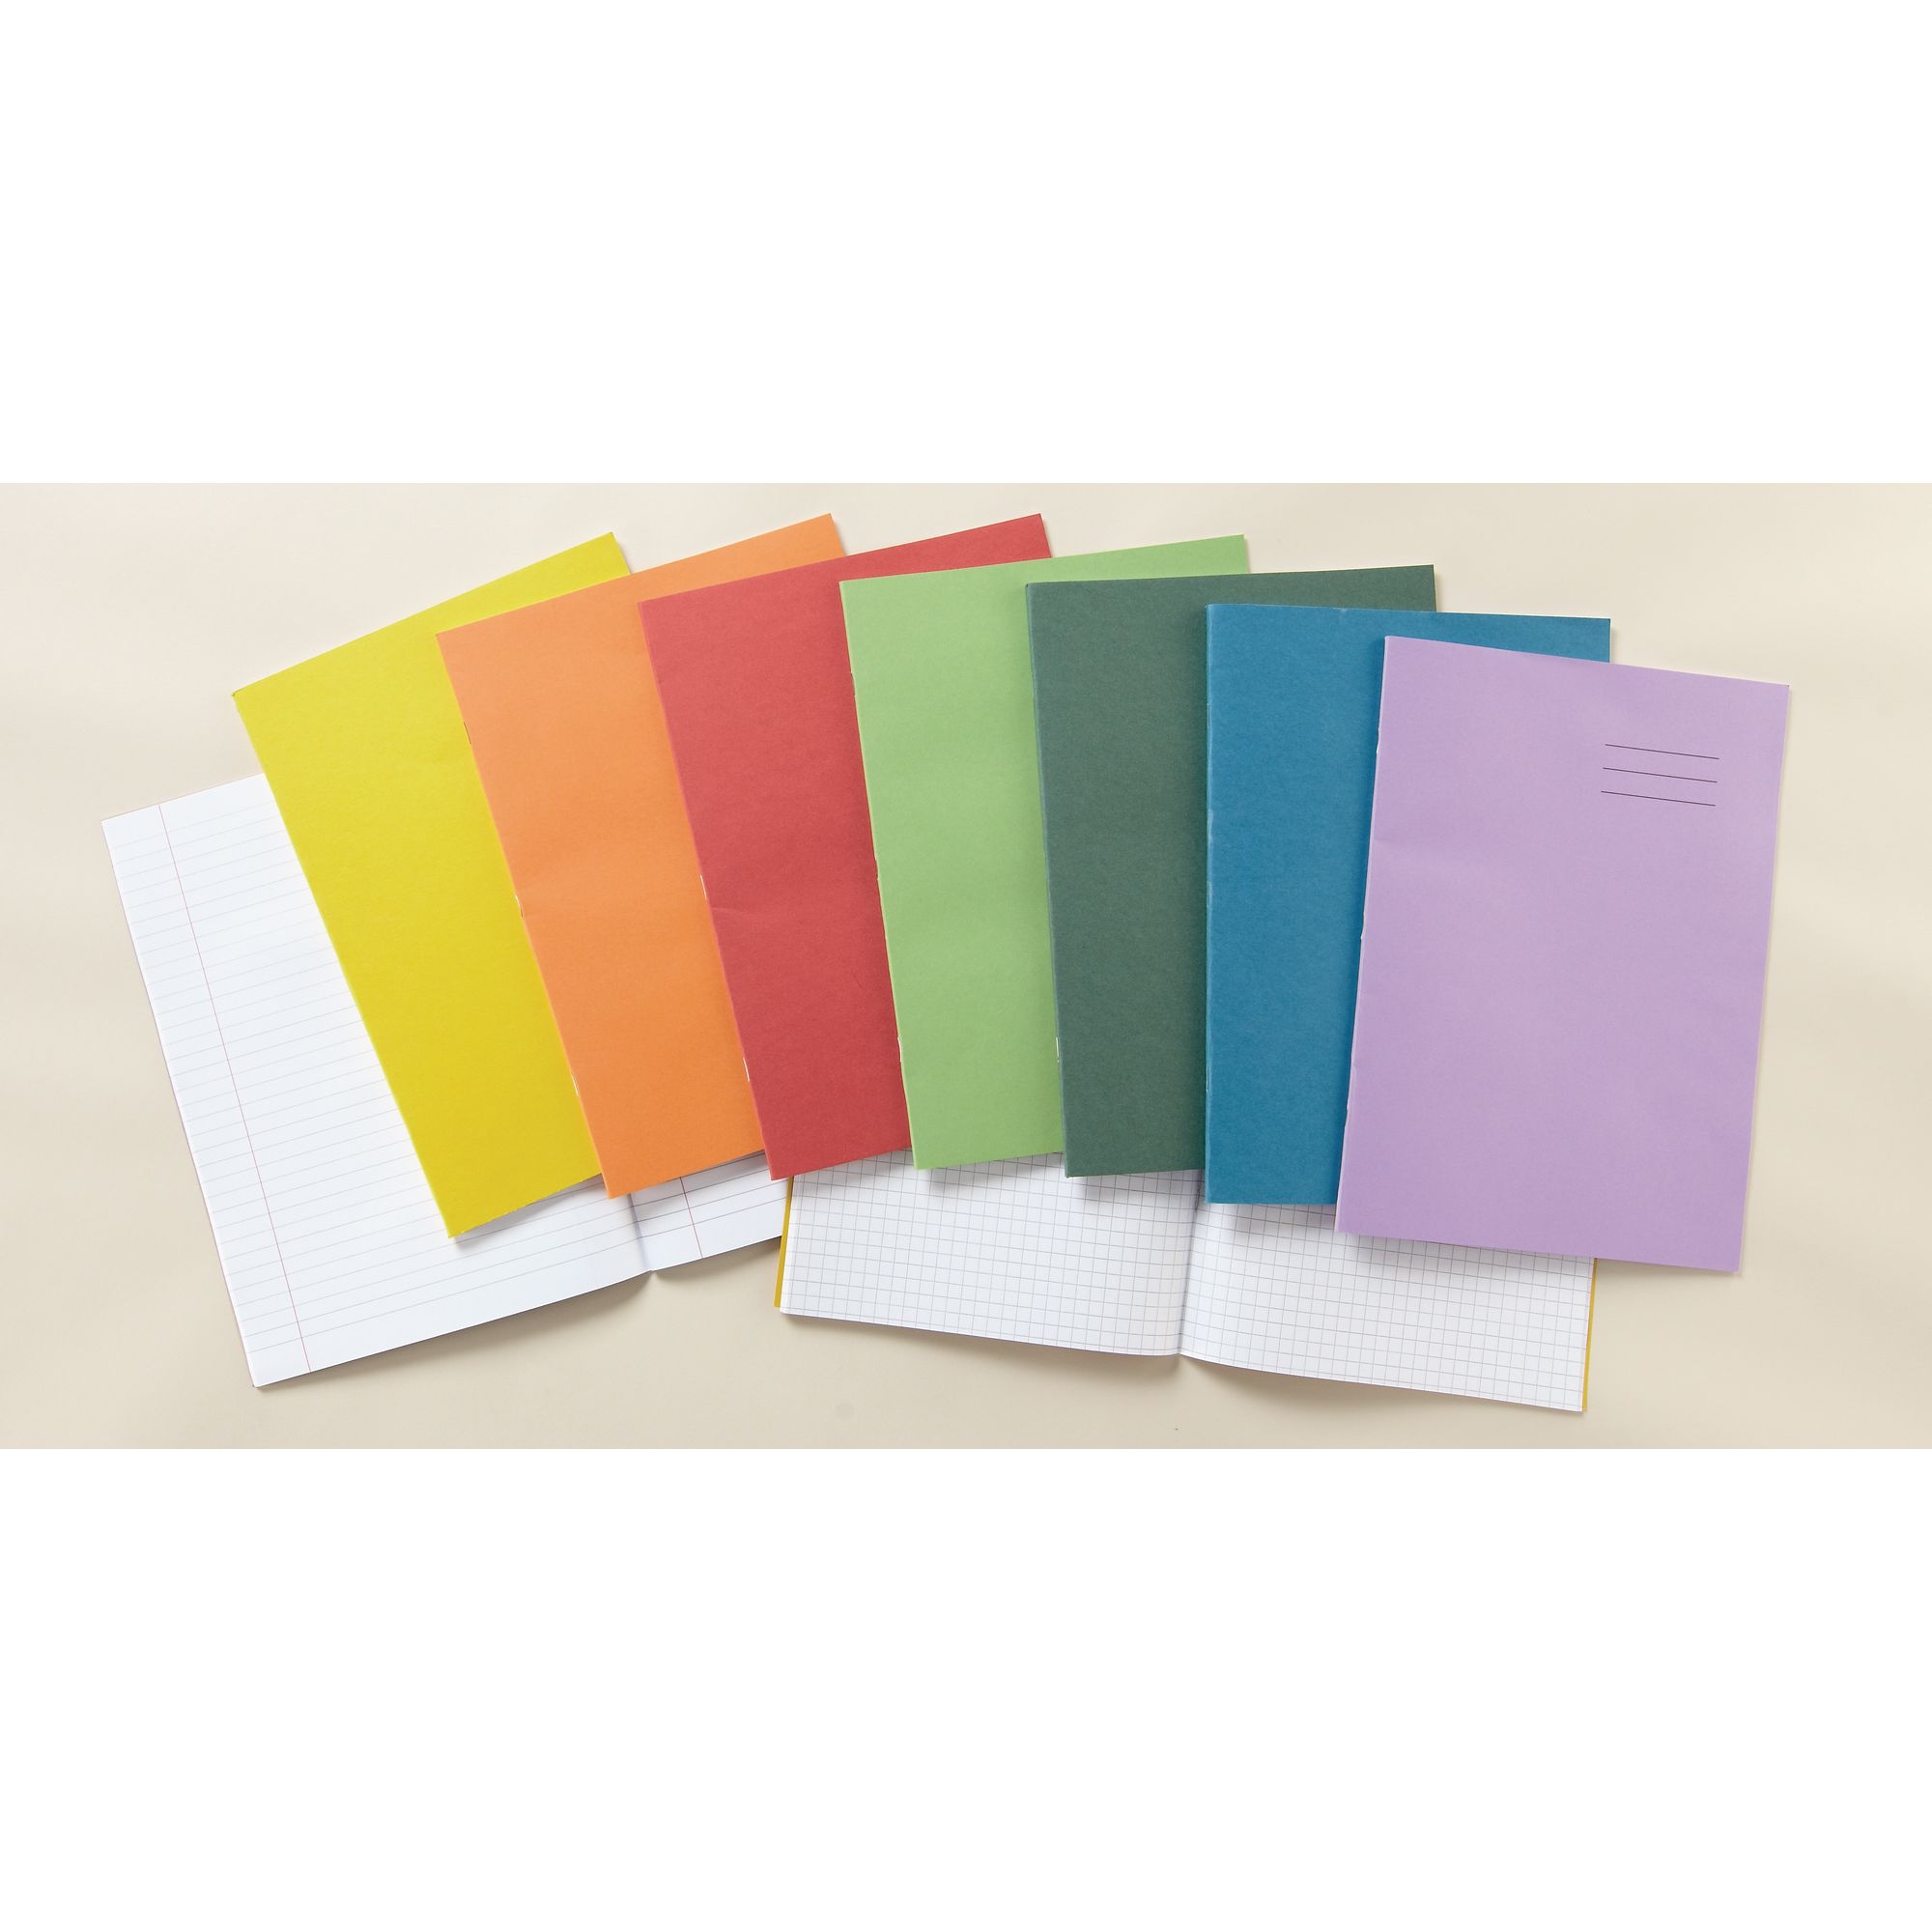 Classmates Orange A4 Exercise Book 32-Page, 8mm Ruled With Margin - Pack of 100